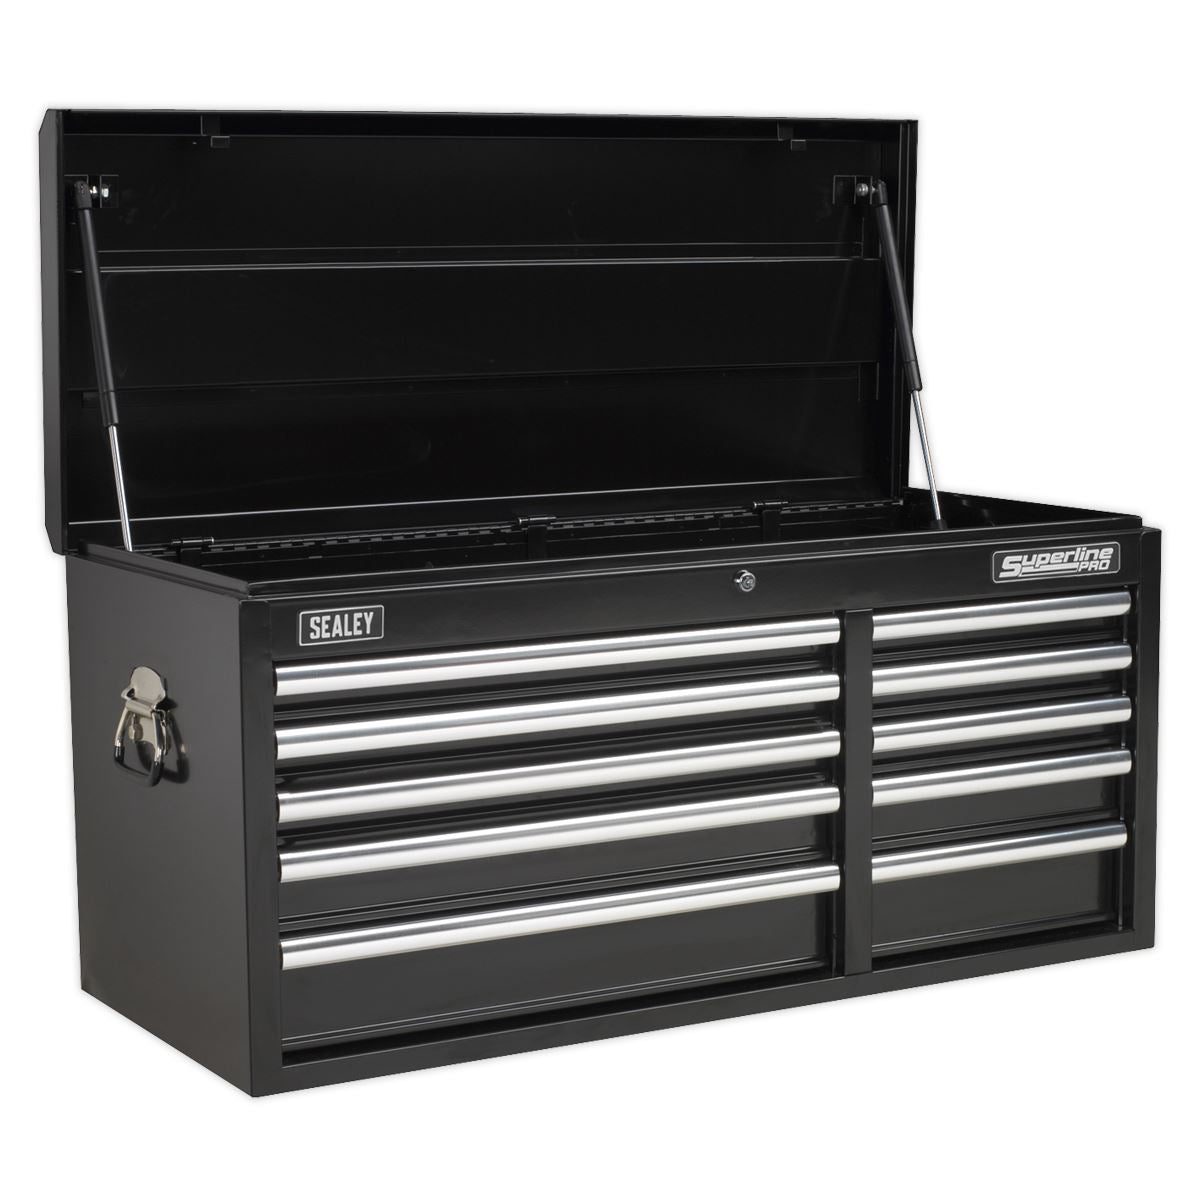 Sealey Superline Pro Topchest 10 Drawer with Ball-Bearing Slides Heavy-Duty - Black